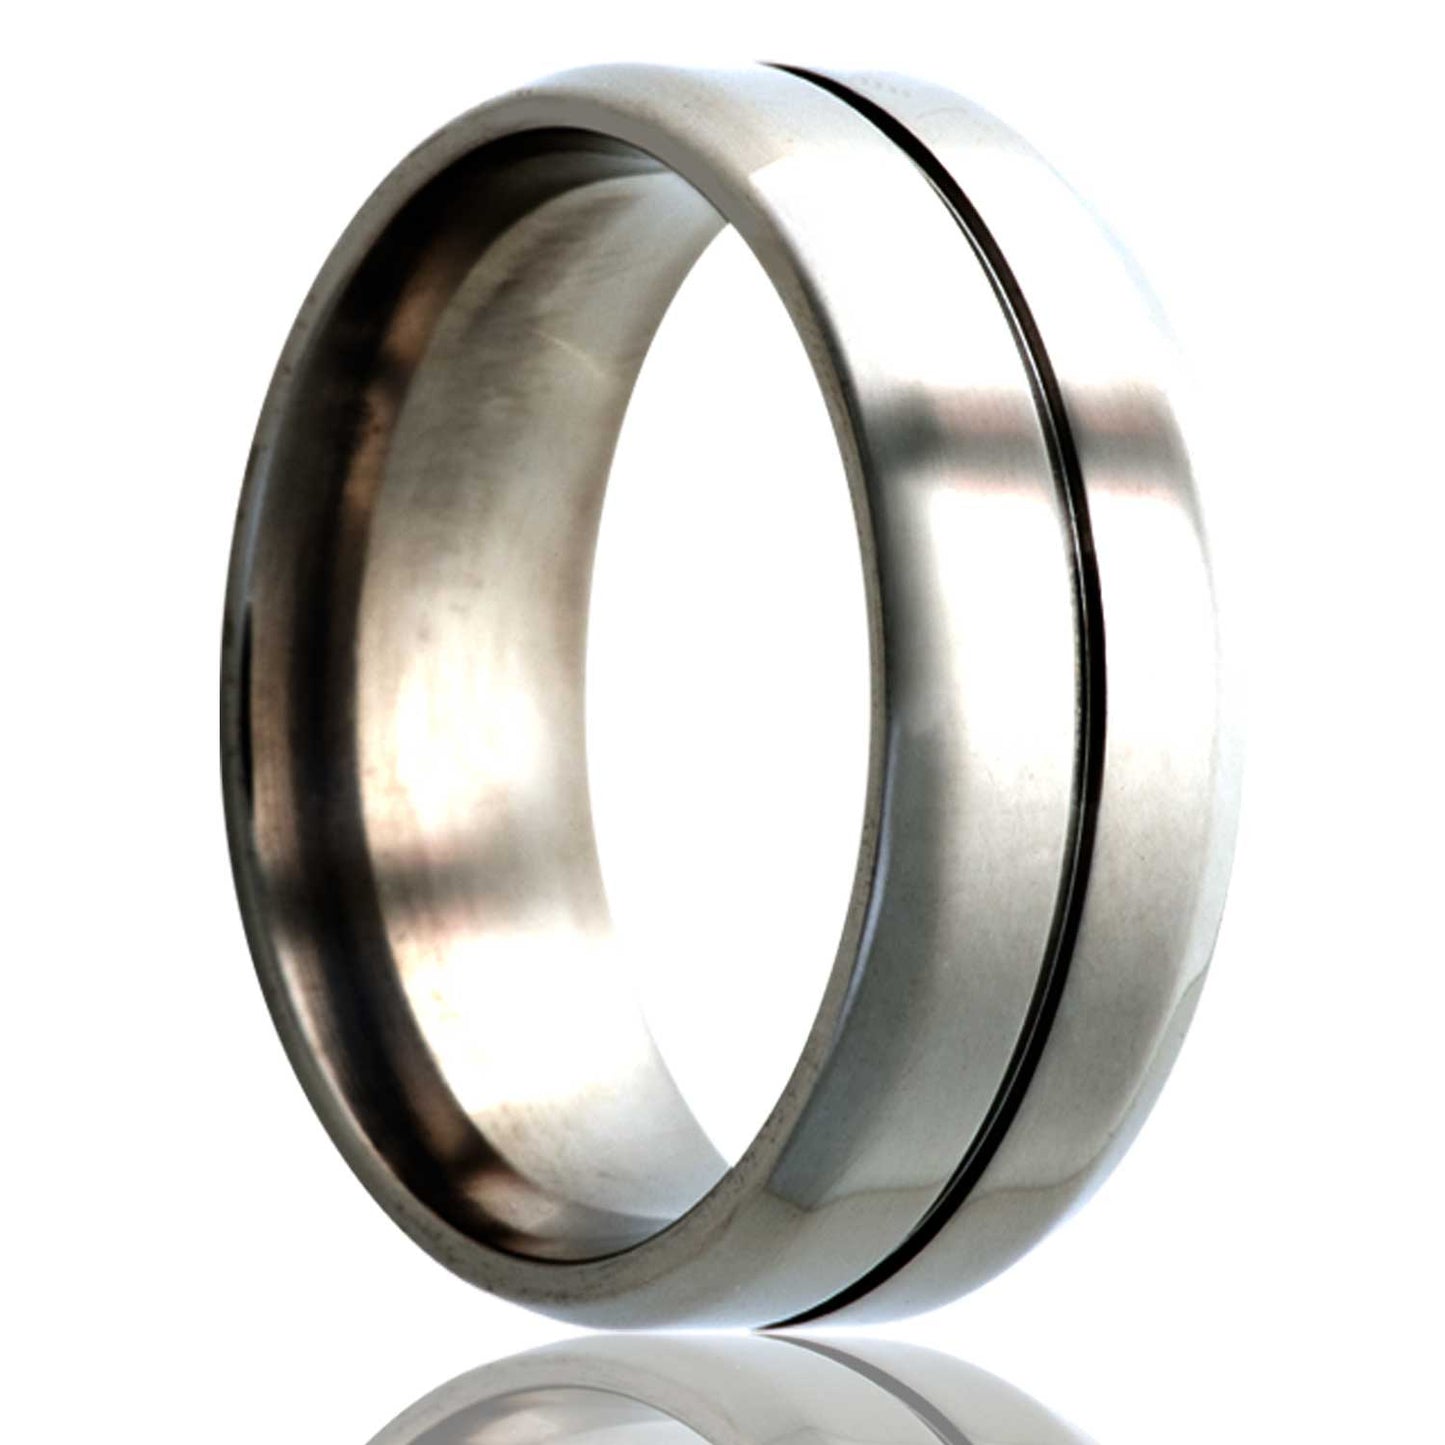 A center grooved titanium wedding band with beveled edges displayed on a neutral white background.